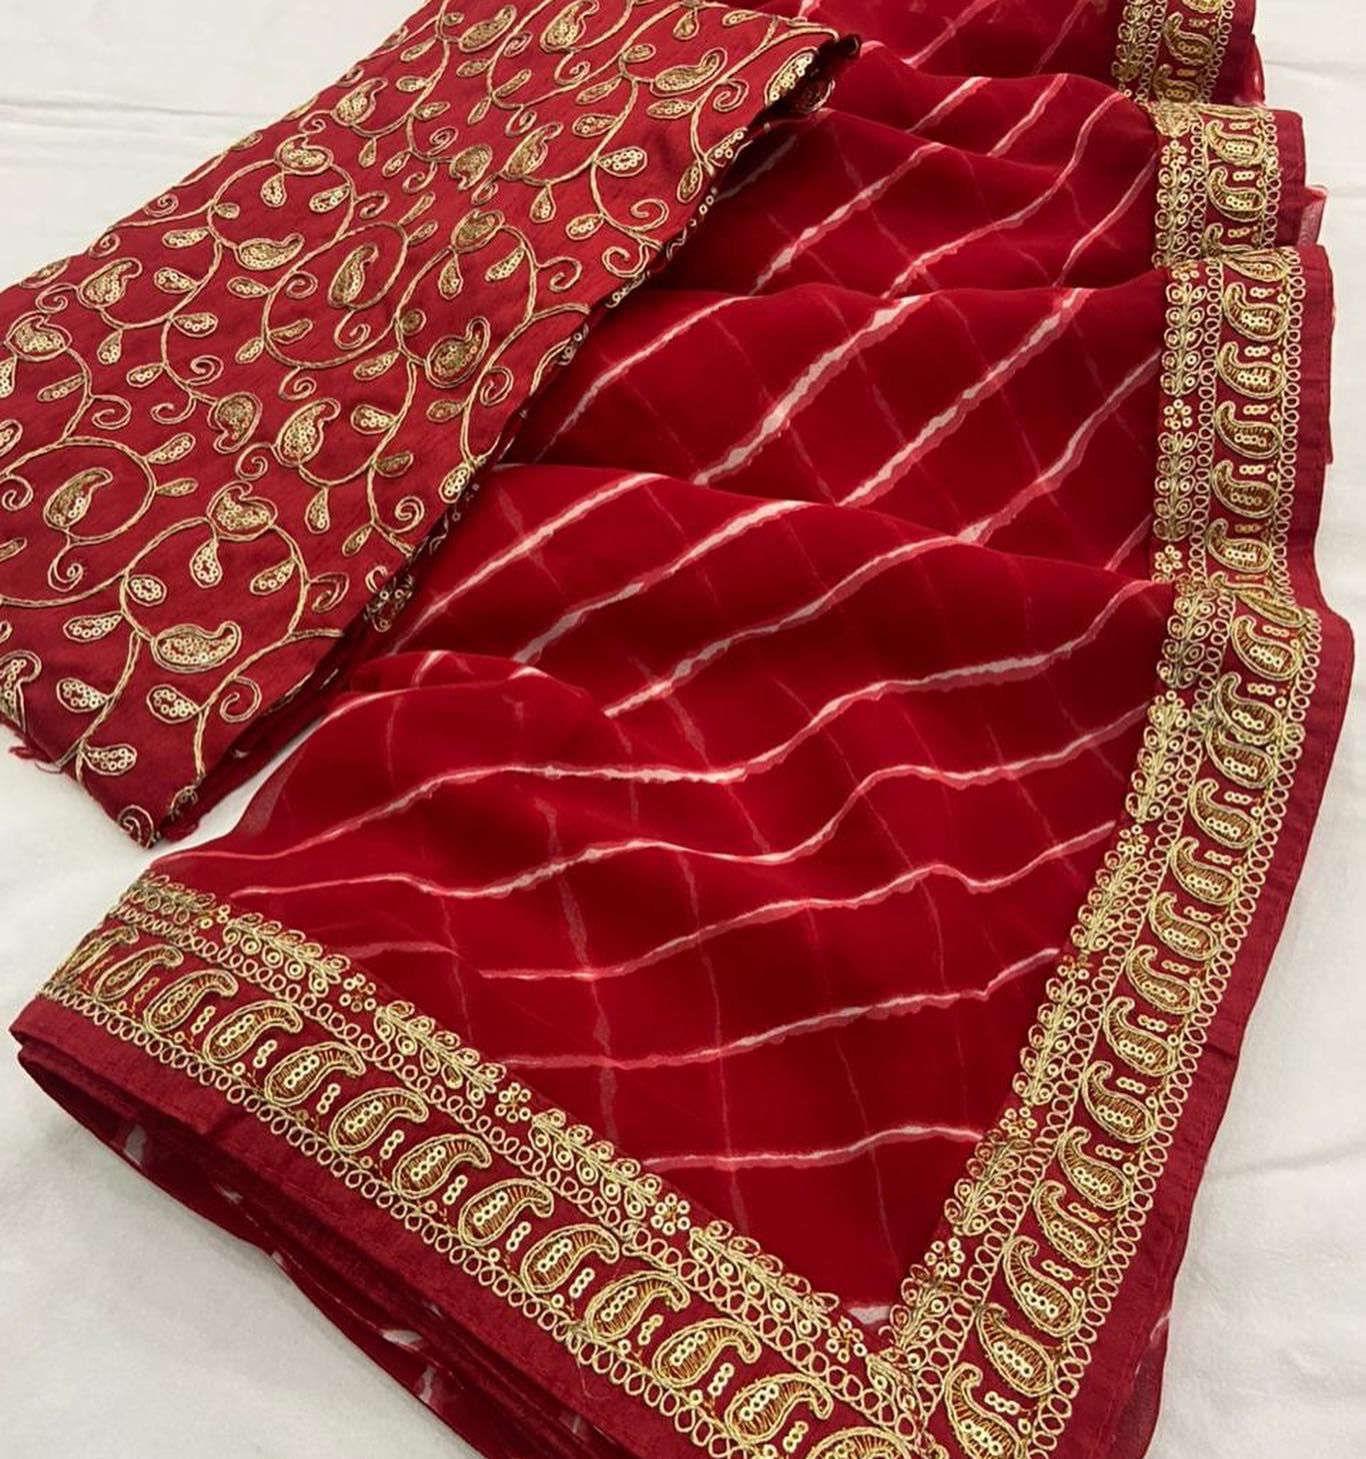 Karwachauth Special Leheriya Saree with Beautiful Embroidered Gotapatti Border and fancy blouse